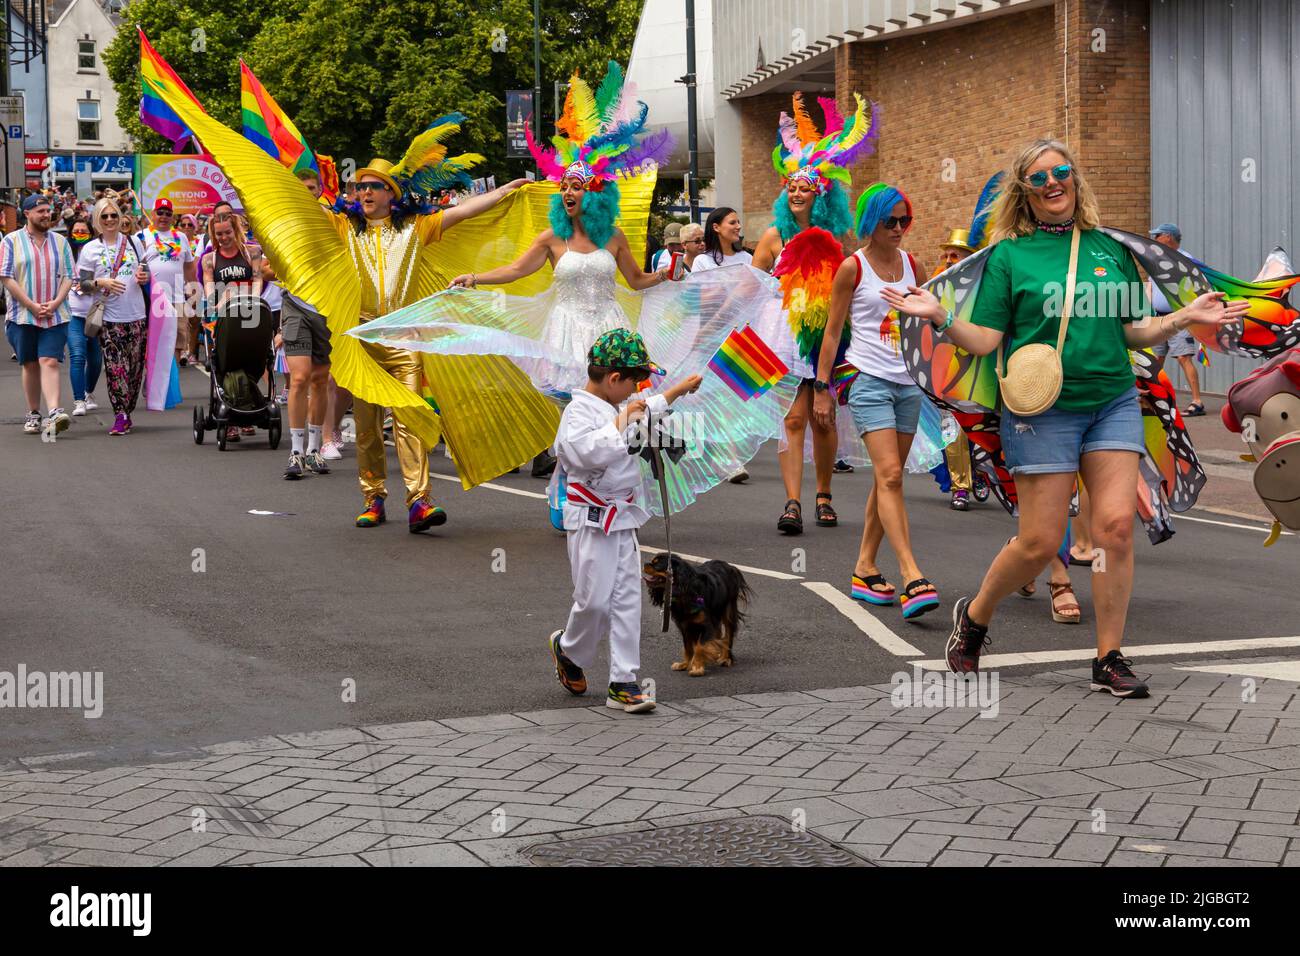 Bournemouth, Dorset, UK. 9th July, 2022. Bourne Free parade at Bournemouth - crowds turn out to watch Bournemouth's annual LGBT Pride Festival and celebration of diversity with approximately 800 people taking part. The theme this year is Pride Goes Green, as participants walk the route. Credit: Carolyn Jenkins/Alamy Live News Stock Photo